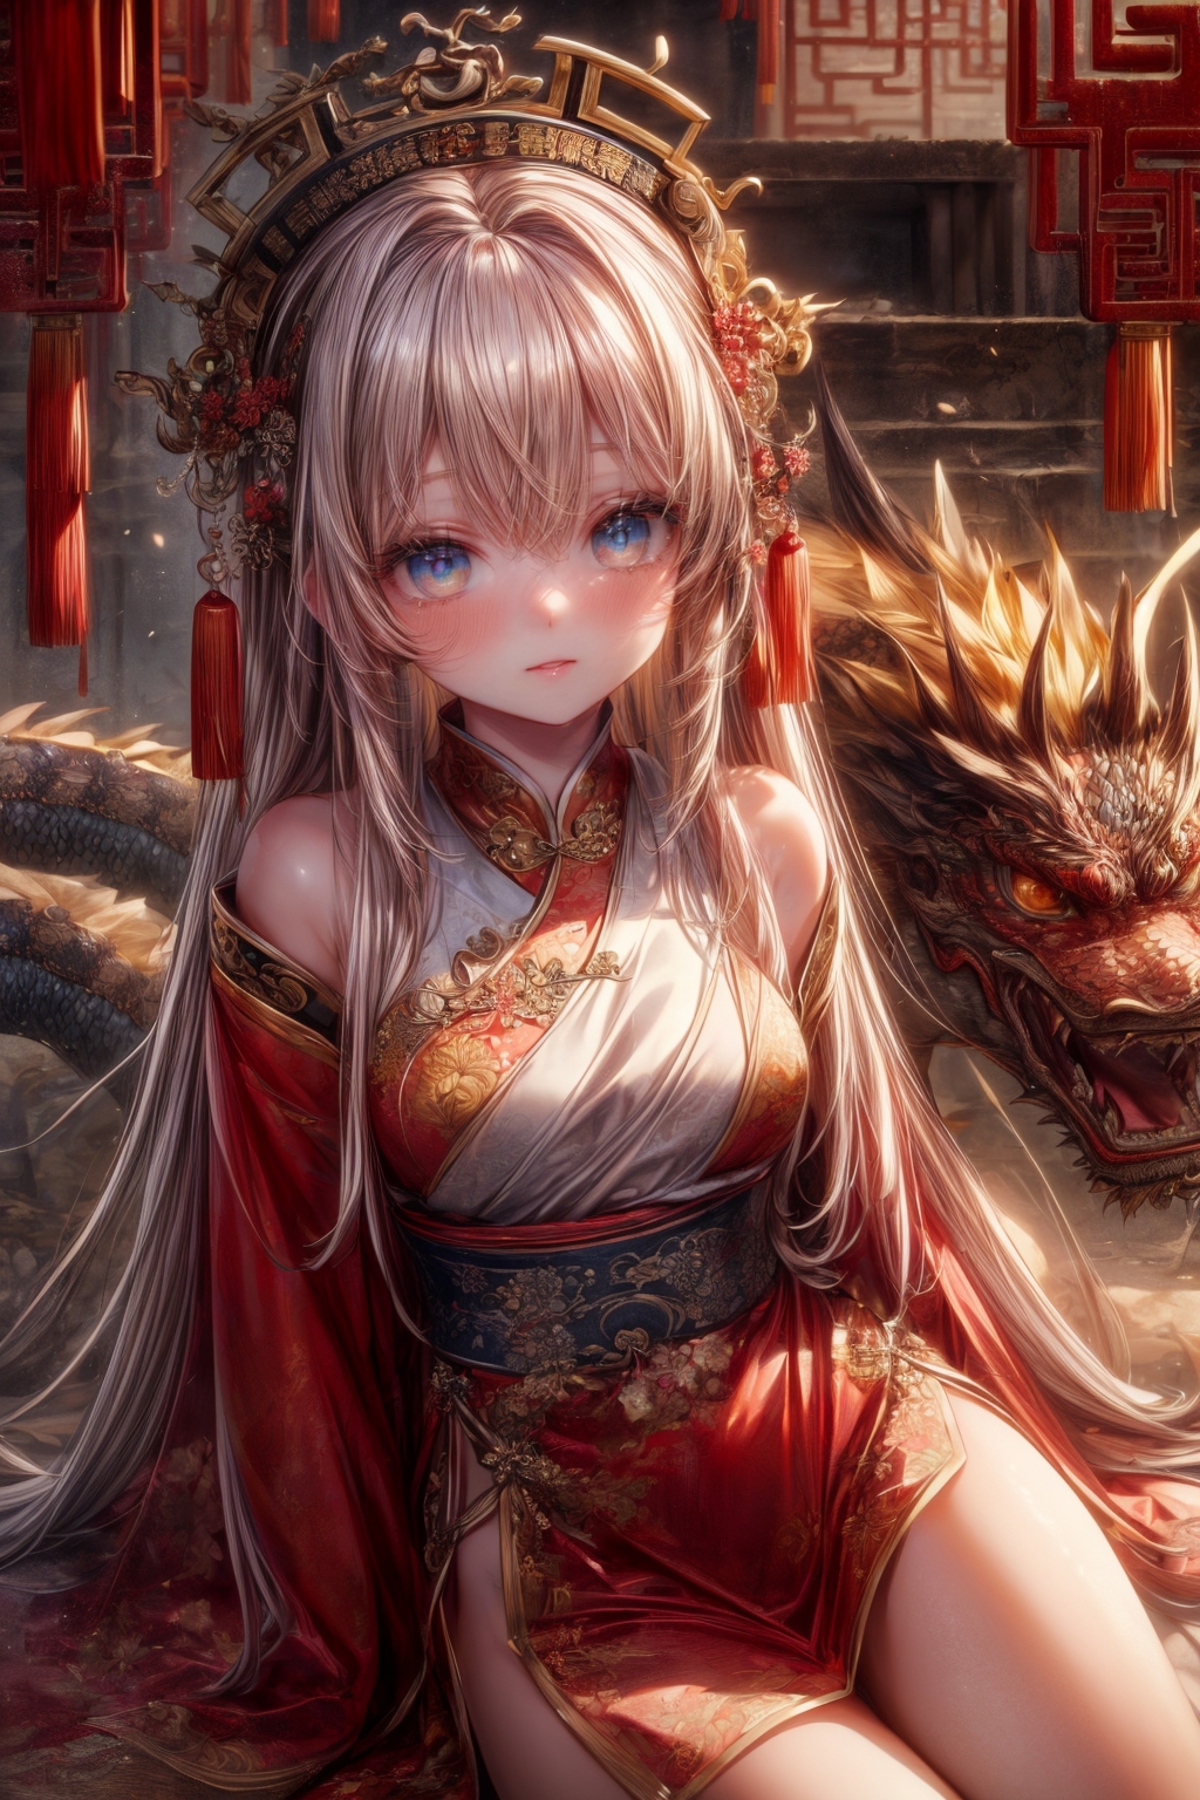 Chinese Dragon Girl image by unknown_bolero537